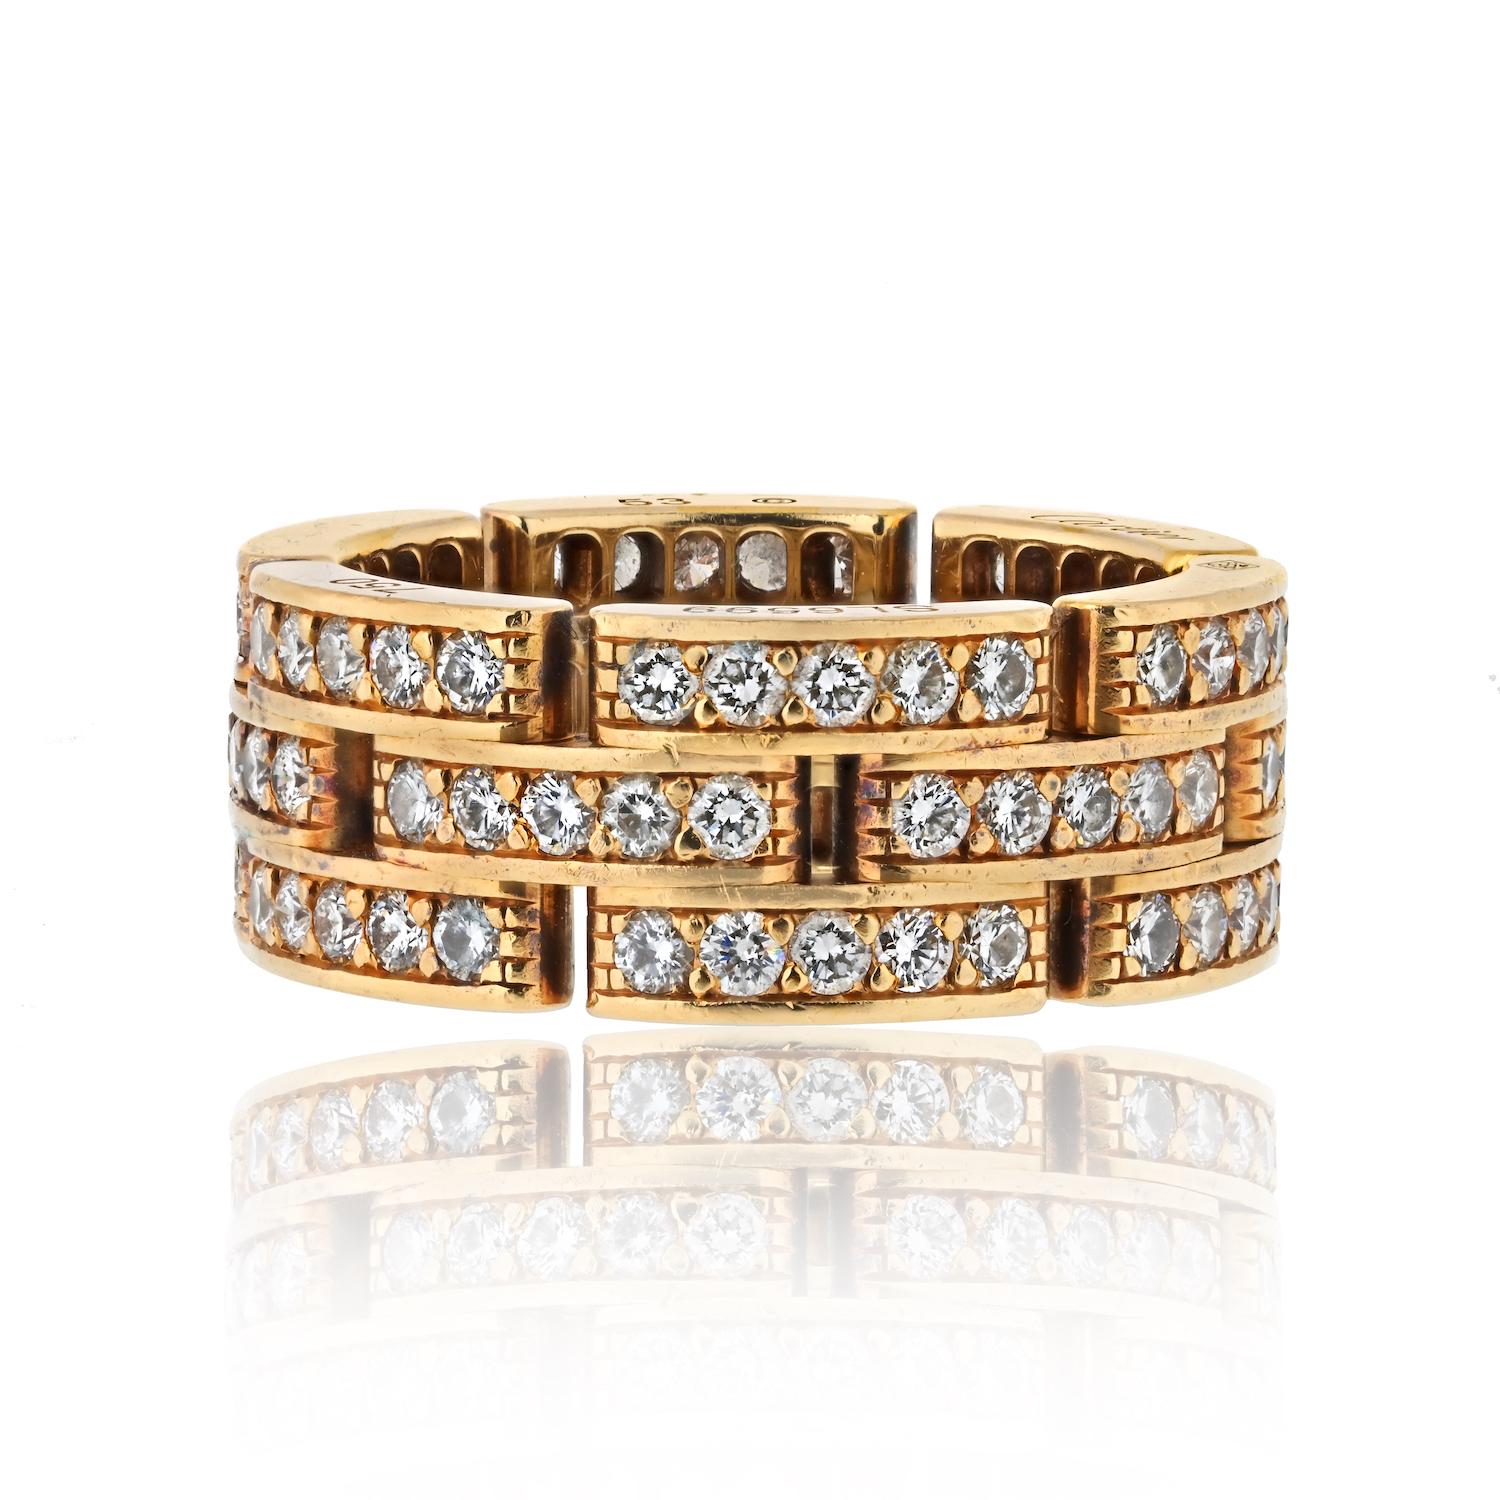 A 3-row band inspired by feline allure. This famous Maillon panther design by Cartier features all round 18k yellow gold links pave-set with 1.50 carats (approx.) of sparkling diamonds. 
EU 53
US 6.5